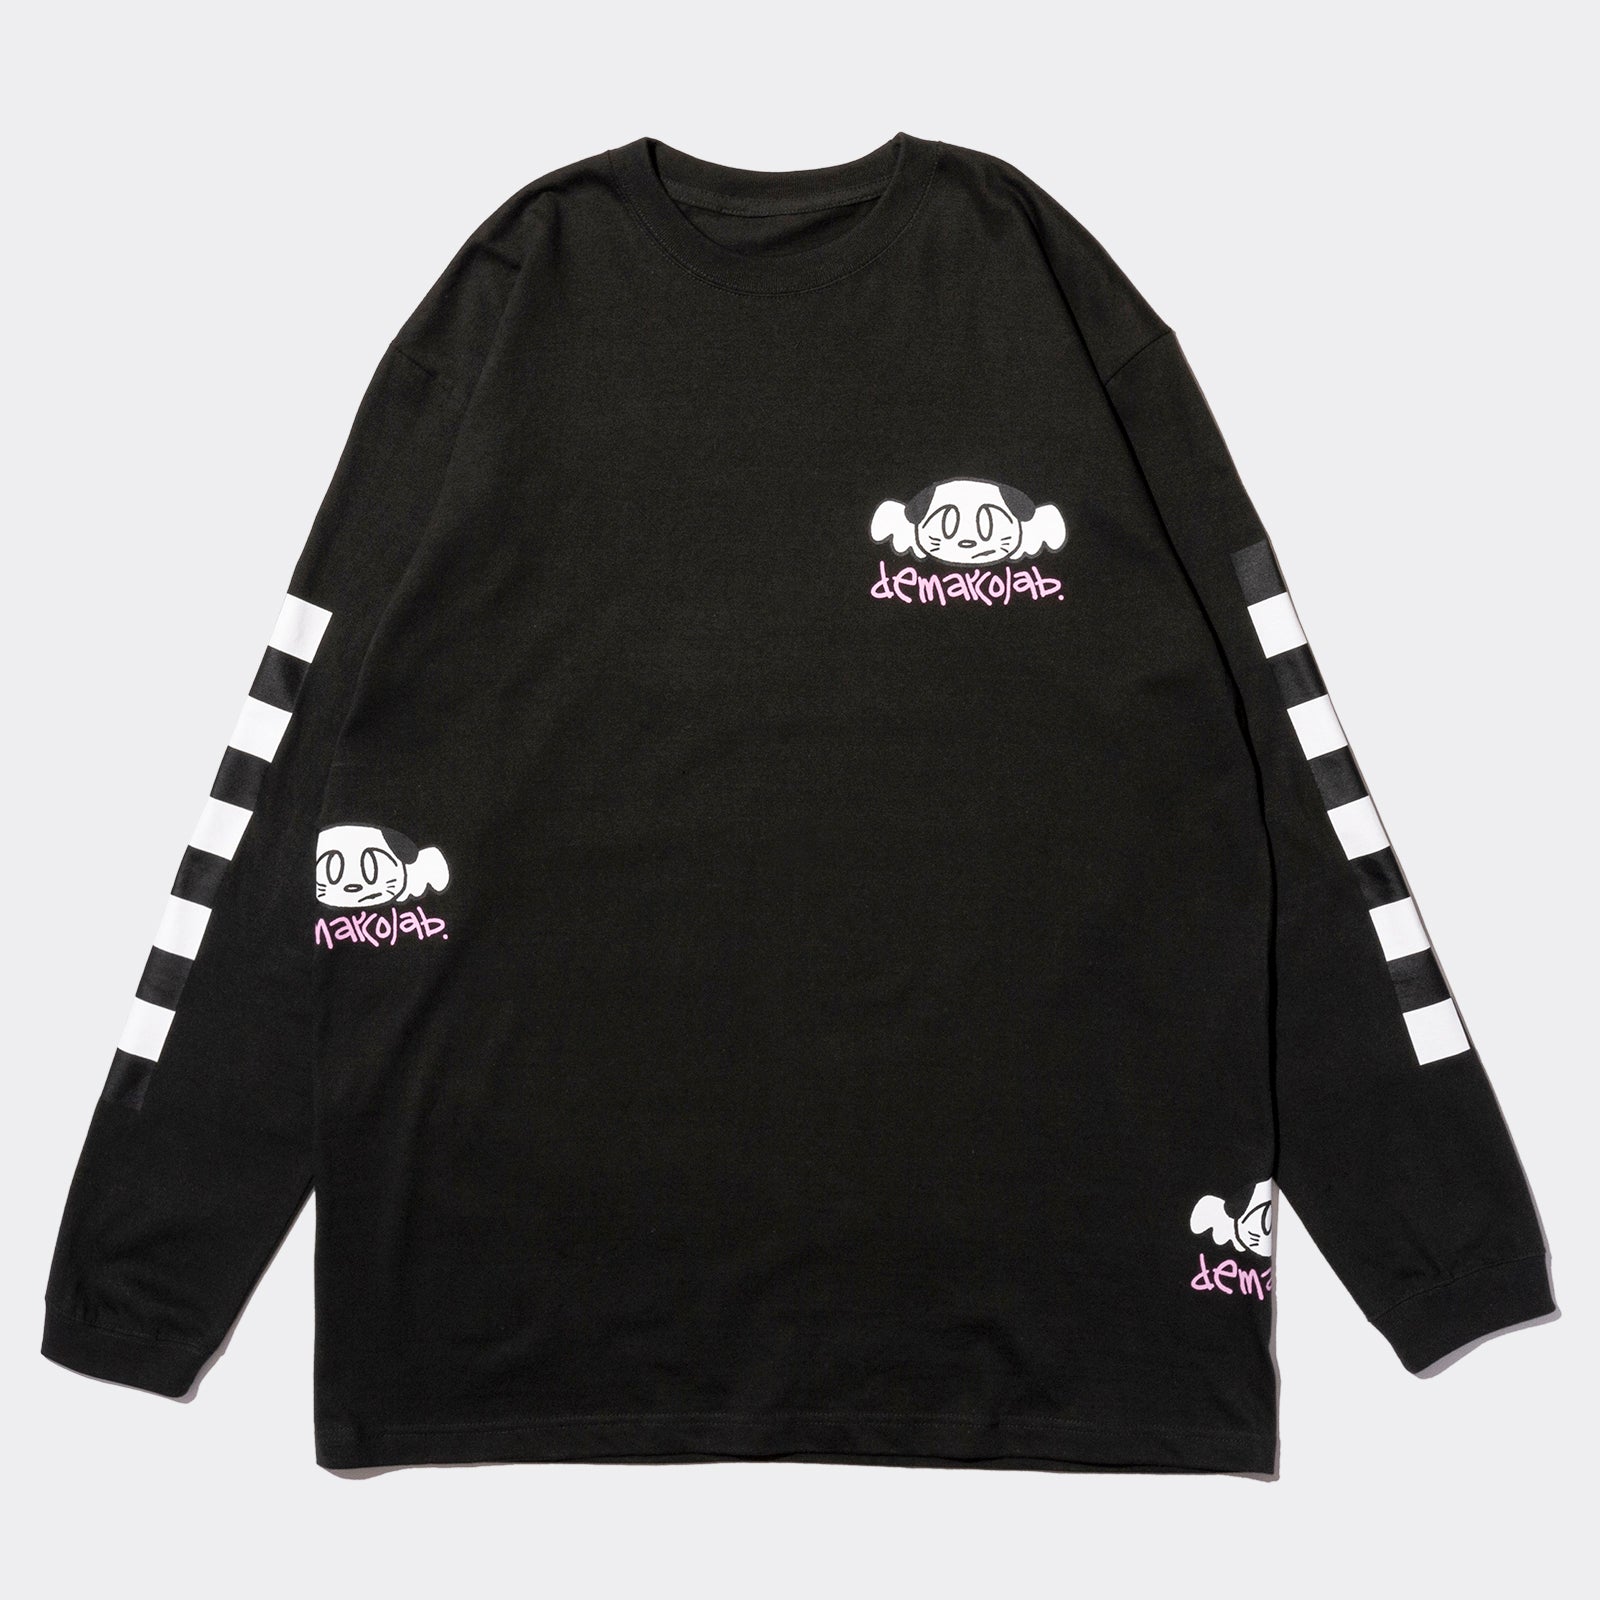 I MISS YOU DOGGIE L/S TEE (Charcoal)